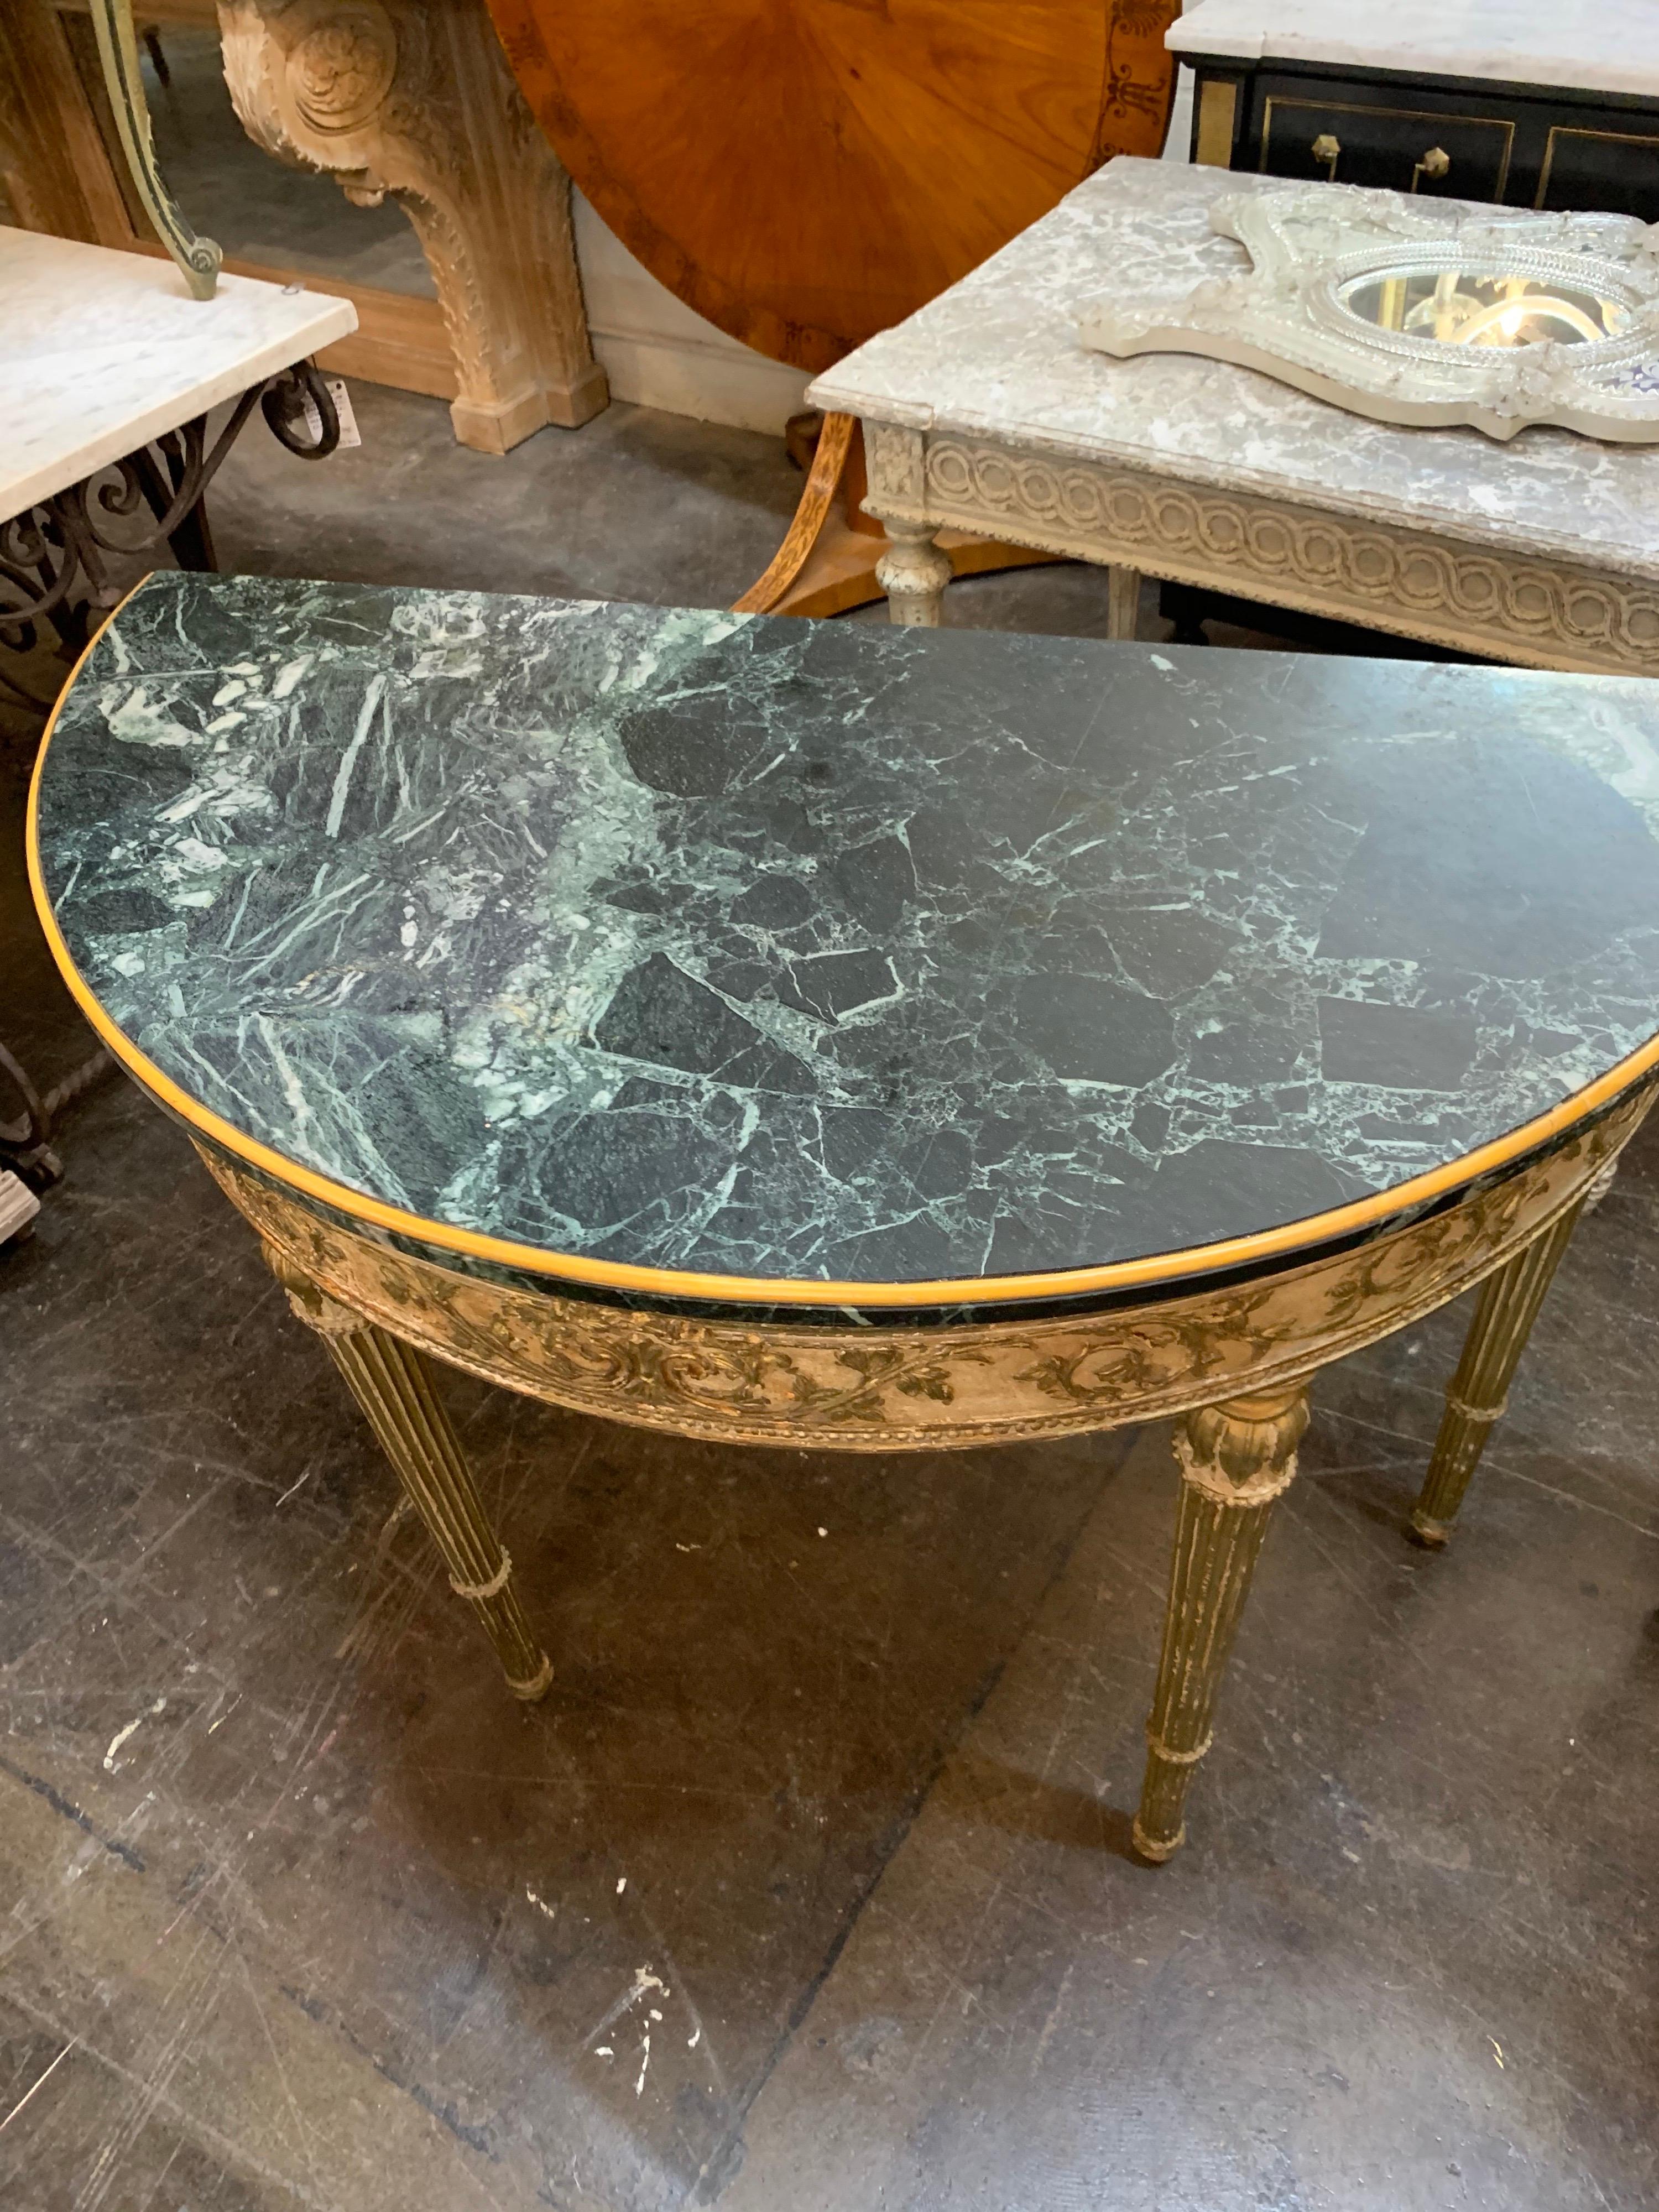 Superb pair of 19th century French Louis XVI style parcel-gilt demilune consoles.
Very fine carving and beautiful gilt on these and quality green marble top as well. A truly exquisite pair!